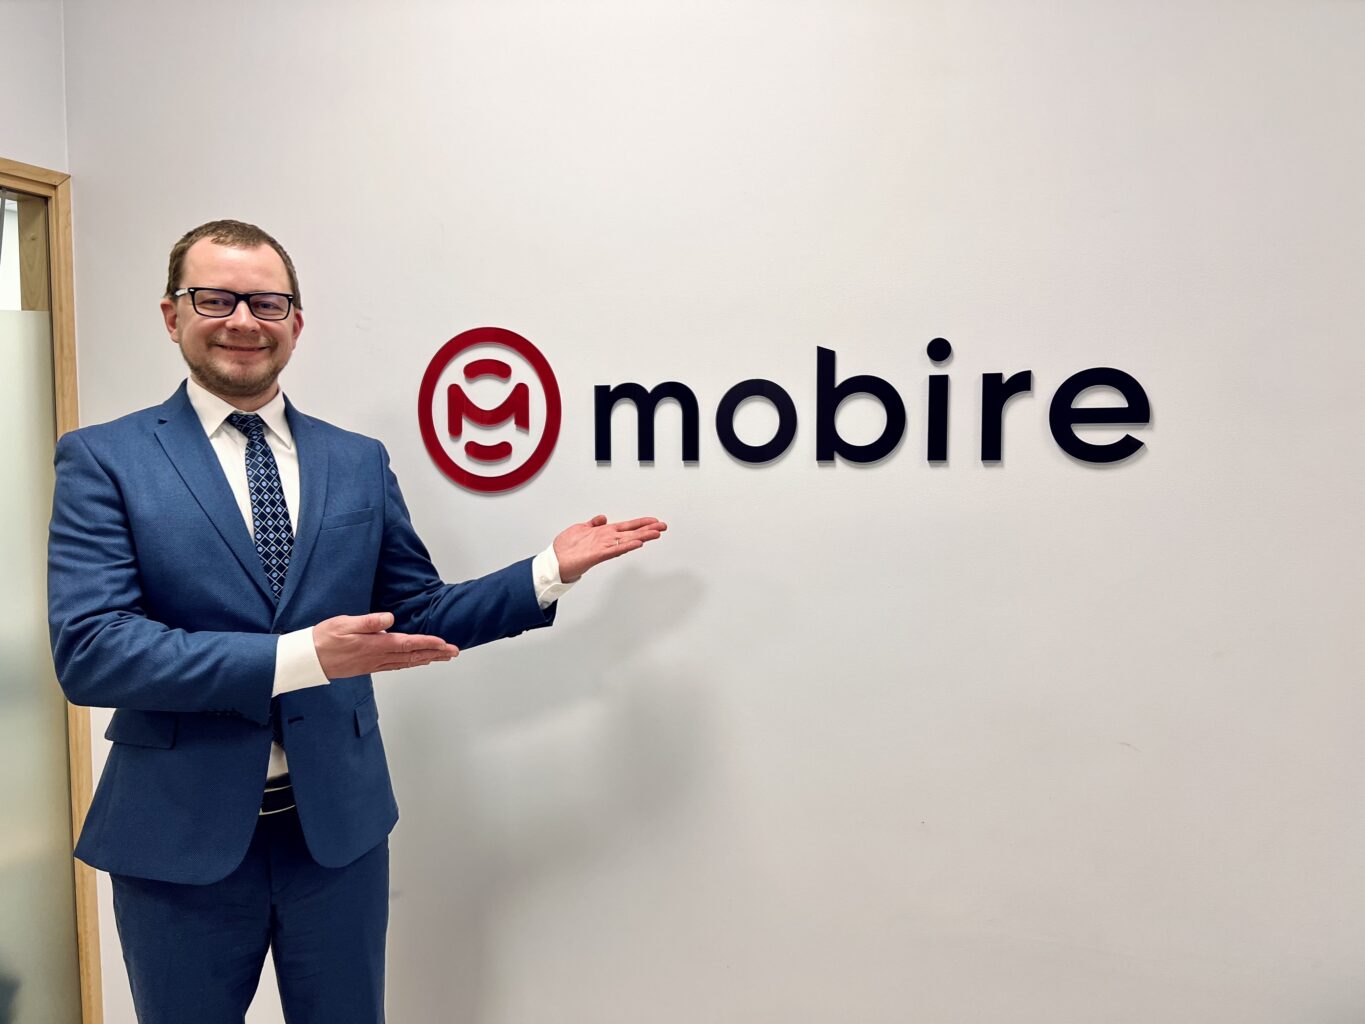 Pelle Kongo joined the Management Board of Mobire Eesti AS